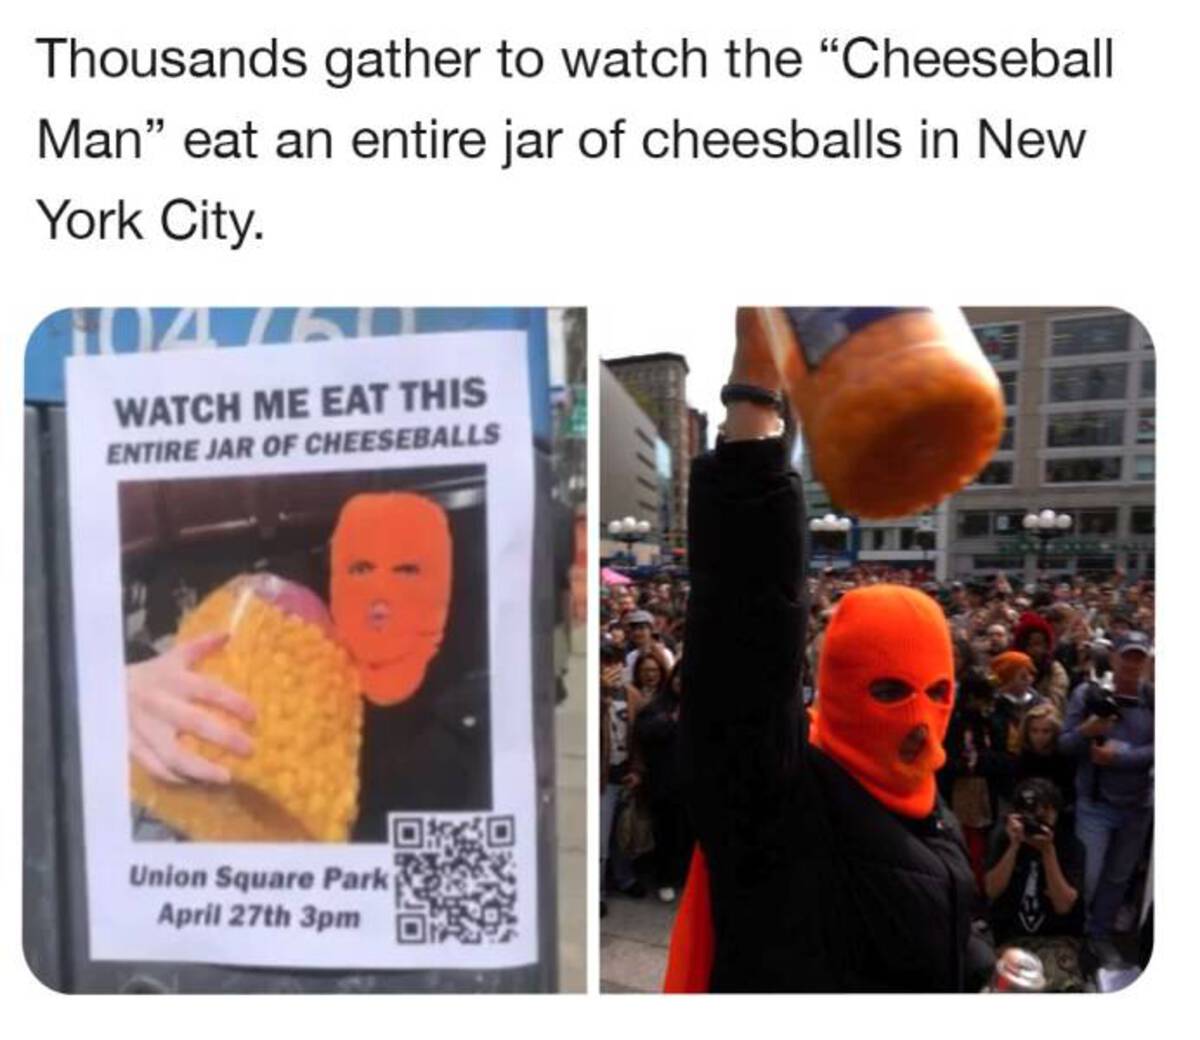 new york cheese ball man - Thousands gather to watch the "Cheeseball Man" eat an entire jar of cheesballs in New York City. Watch Me Eat This Entire Jar Of Cheeseballs Union Square Park April 27th 3pm